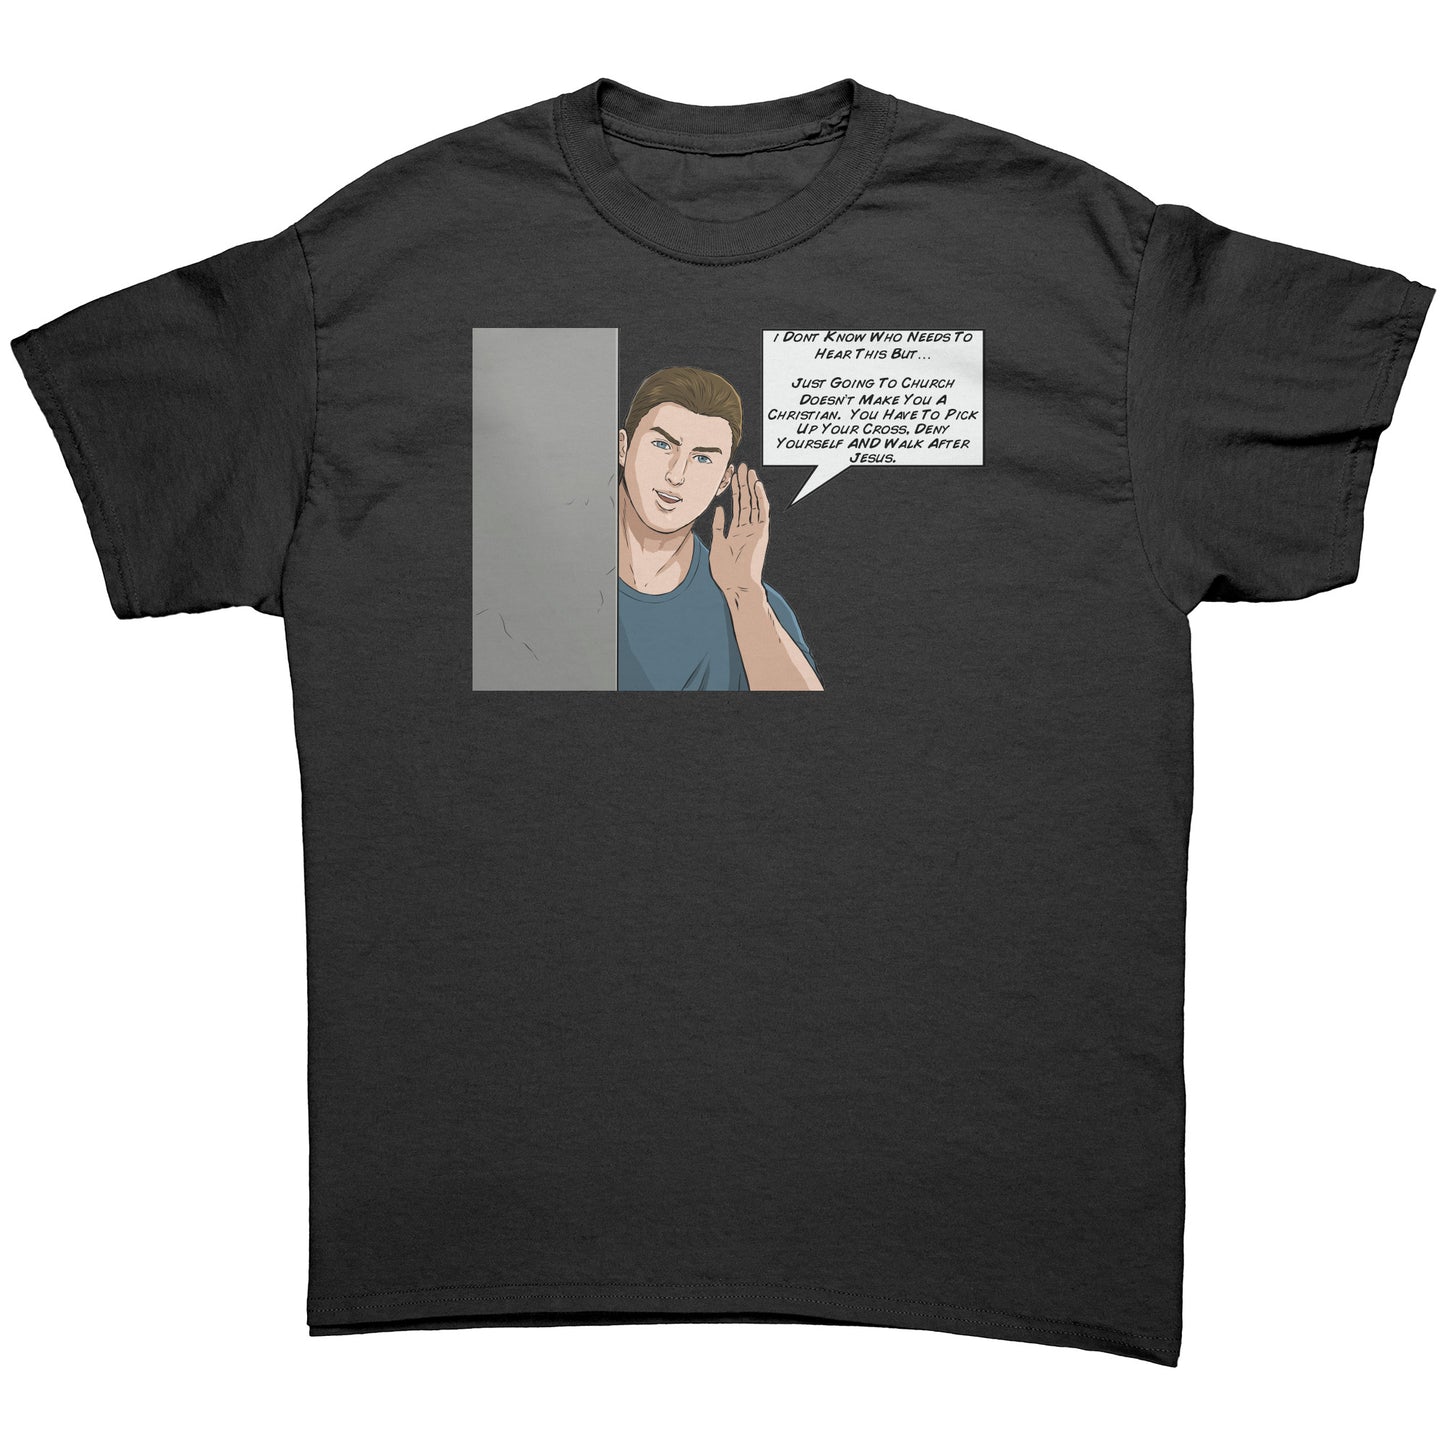 I Don't Know Who Needs To Hear This But...Men's T-Shirt